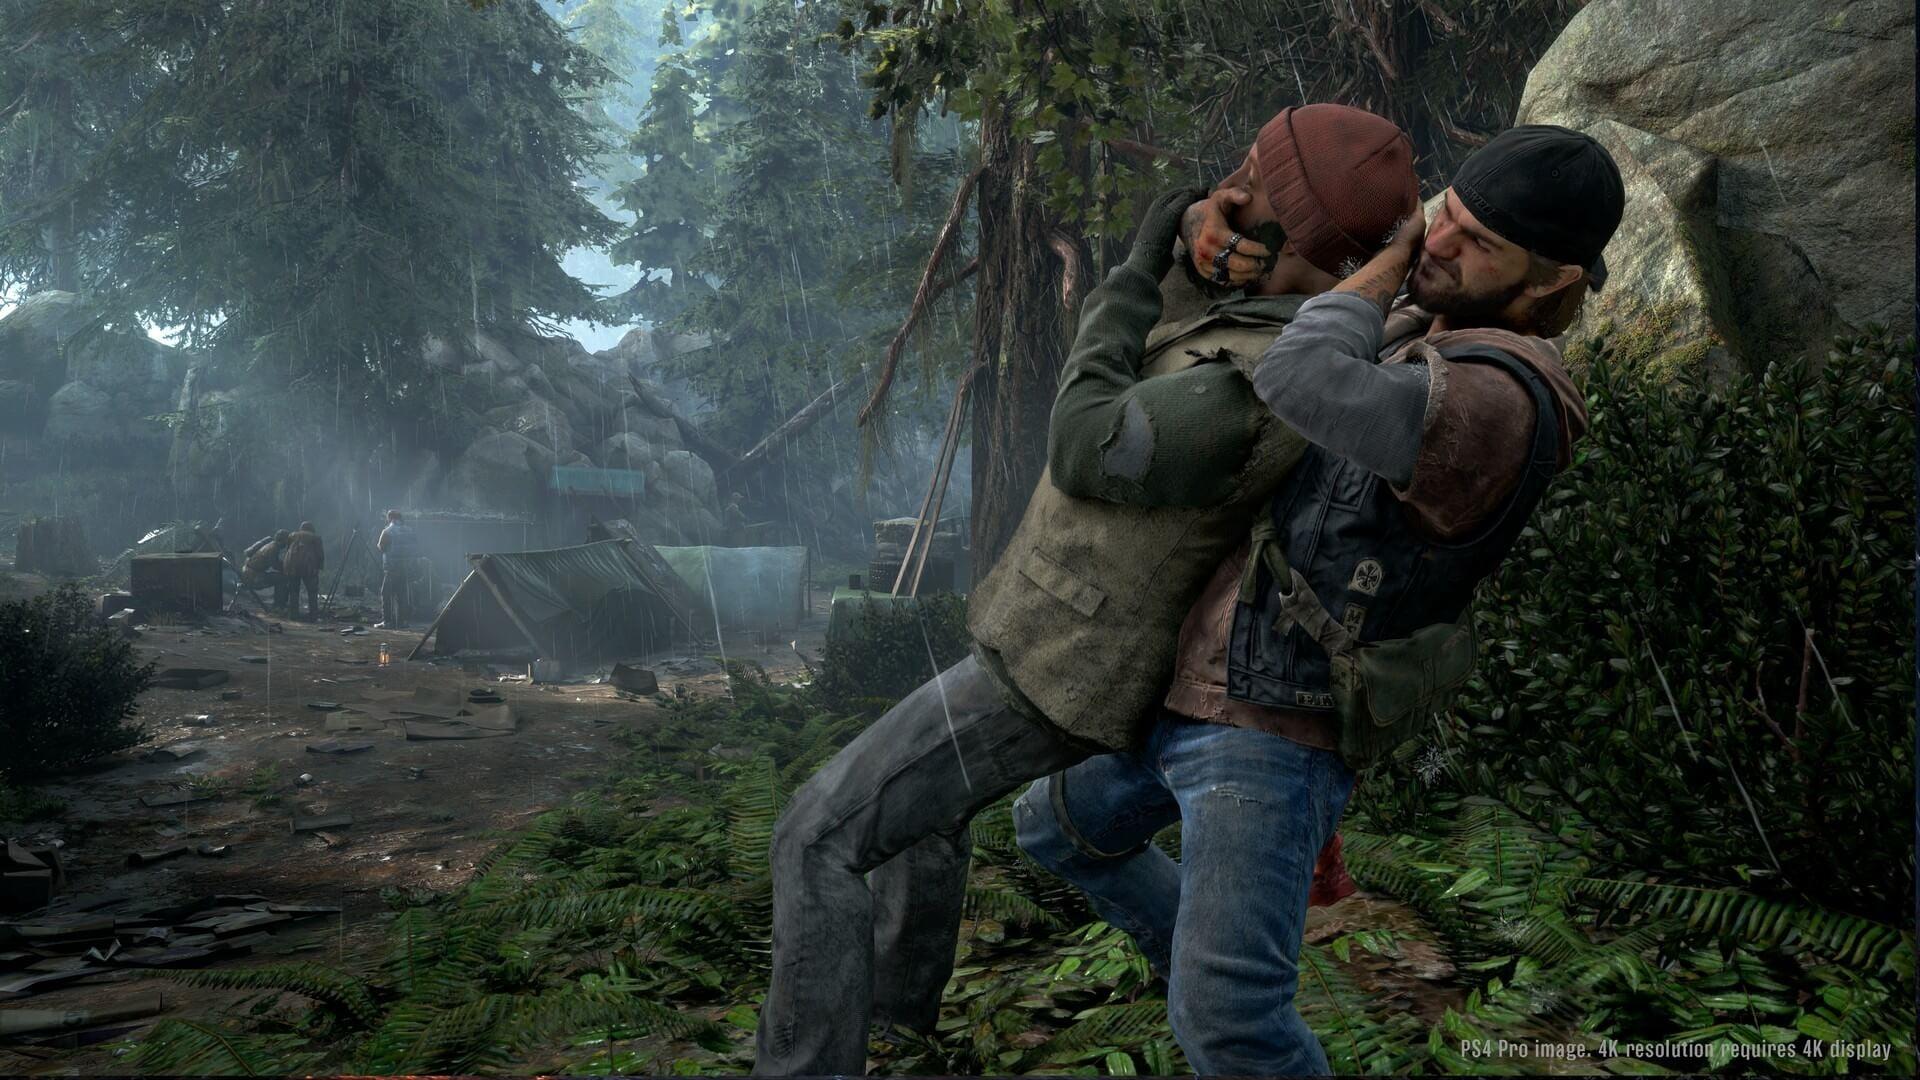 PlayStation 4 Exclusive Days Gone Delayed To April 2019 To Add